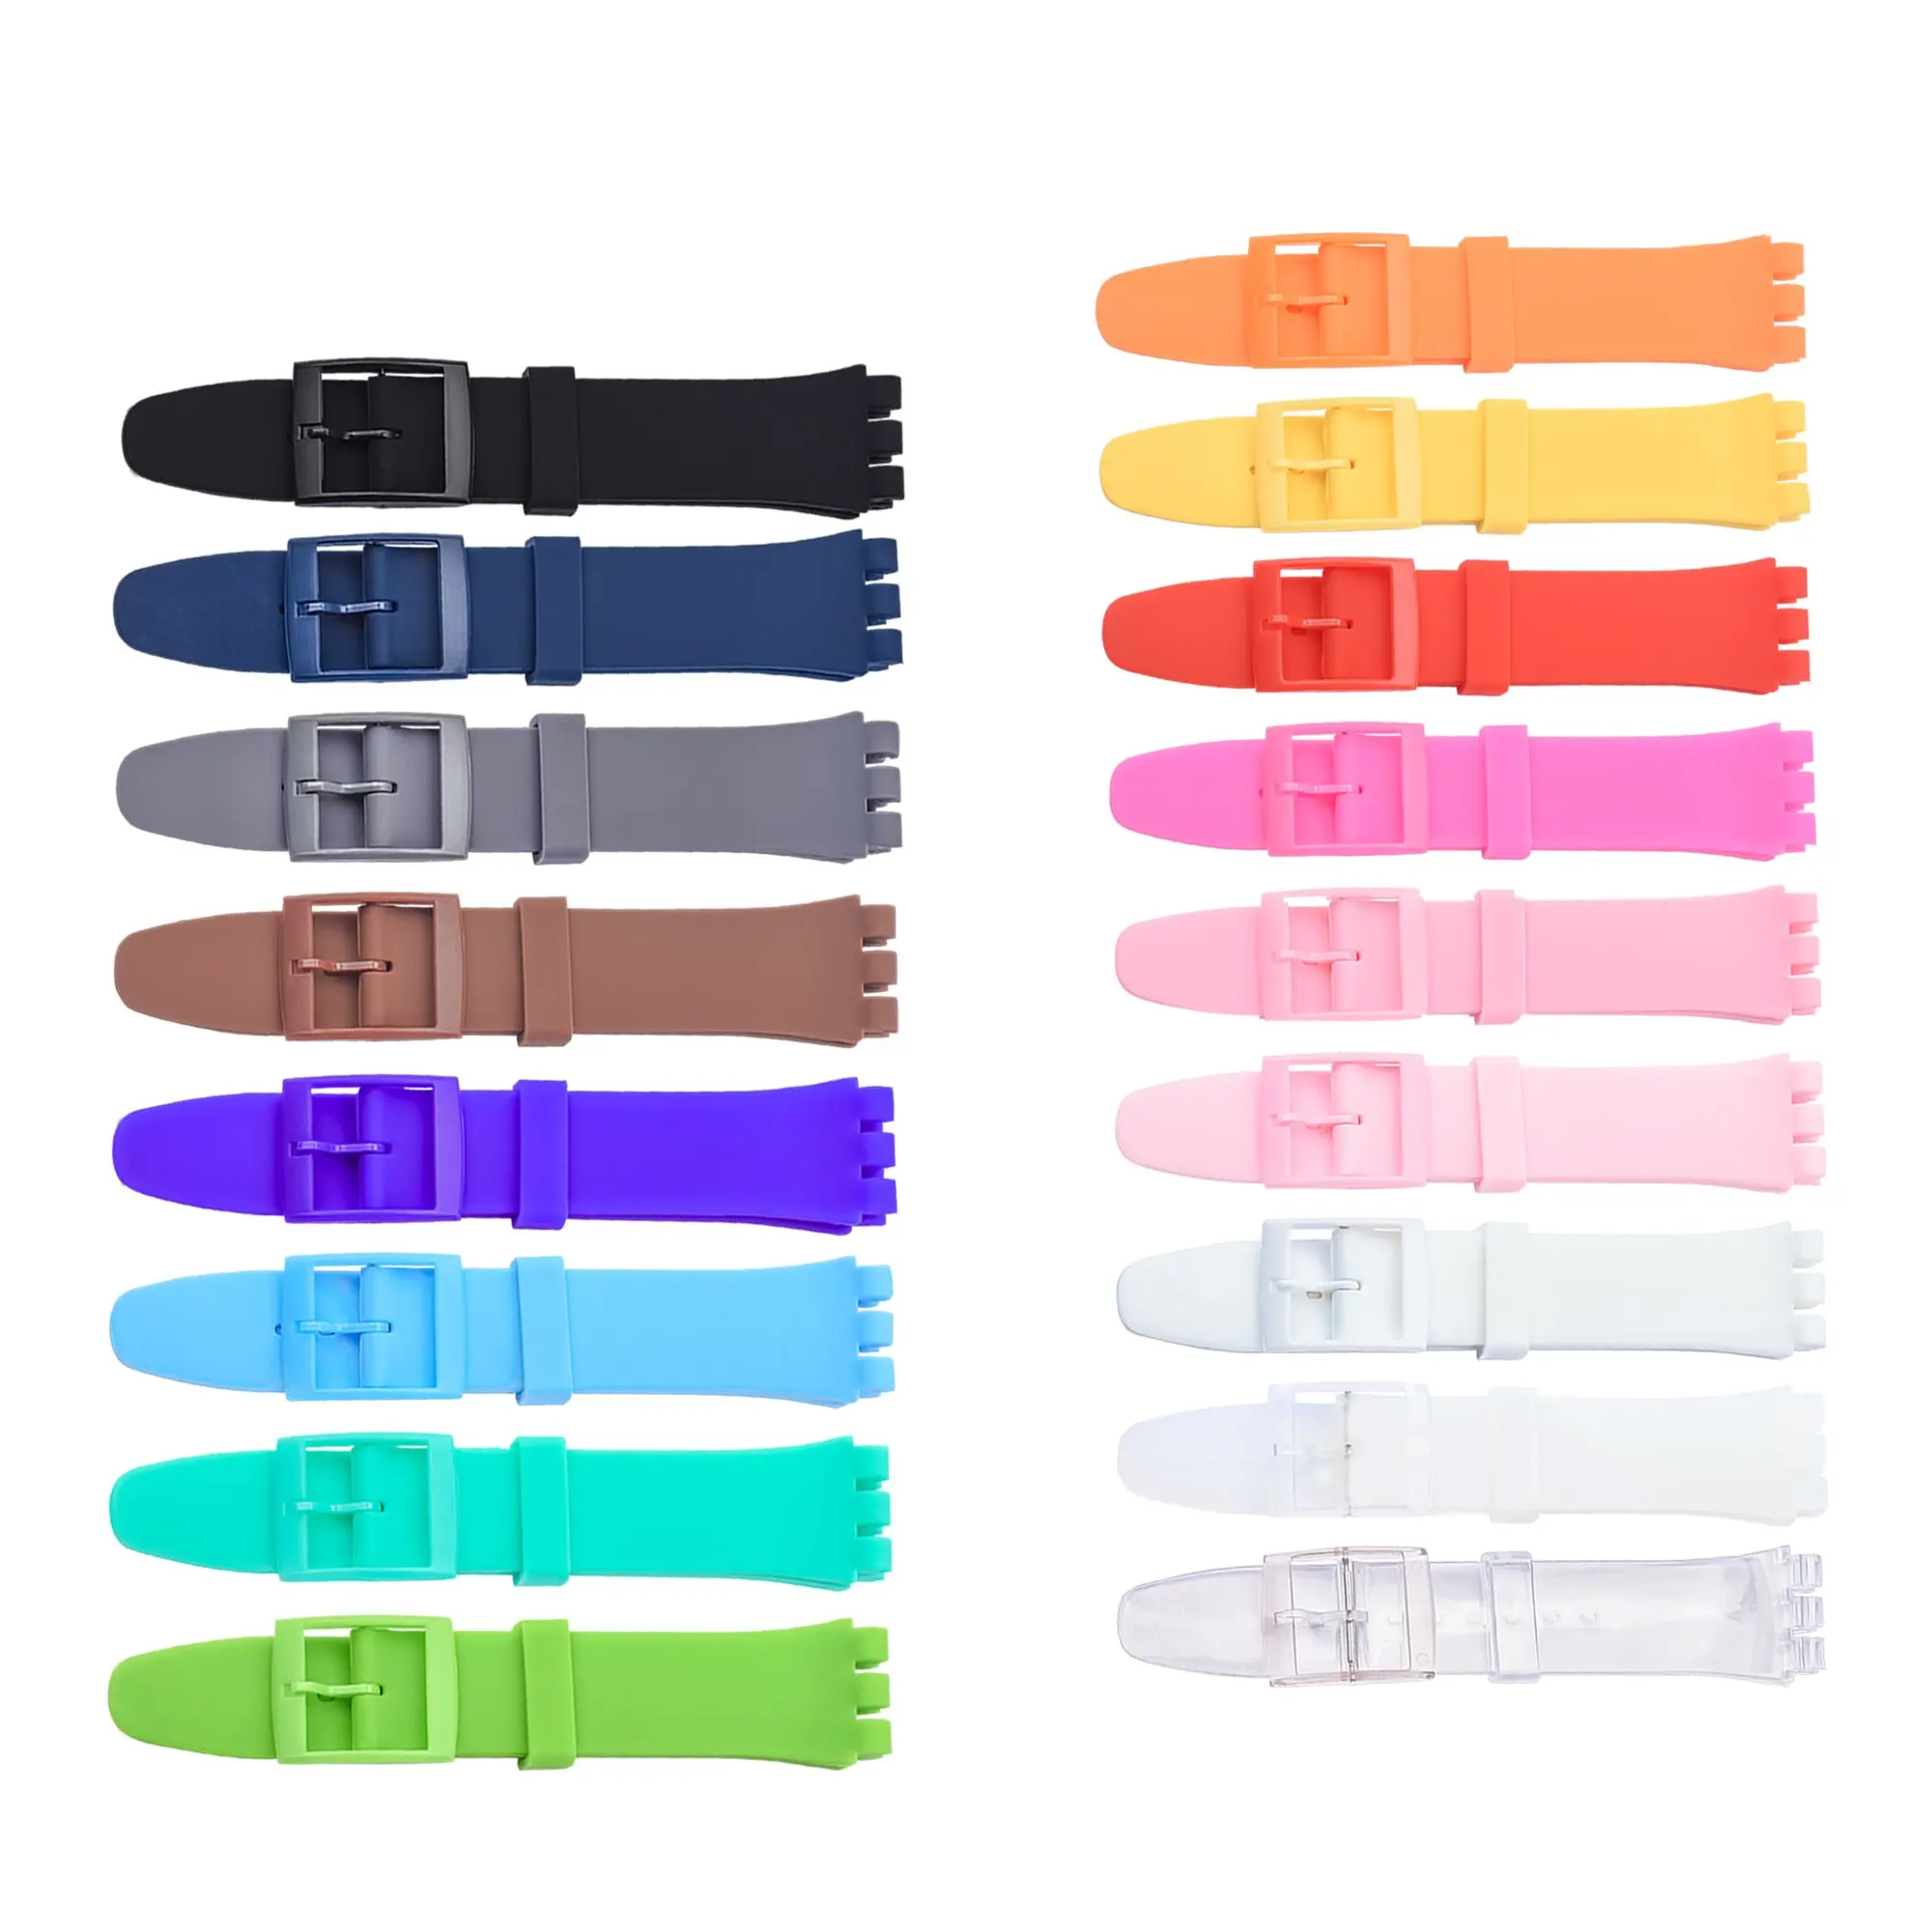 

Watch Bands wristlet 12mm 16mm 17mm 19mm 20mm Rubber Replace Bracelet Strap Colorful Silicone Watch Strap For Swatch Watch